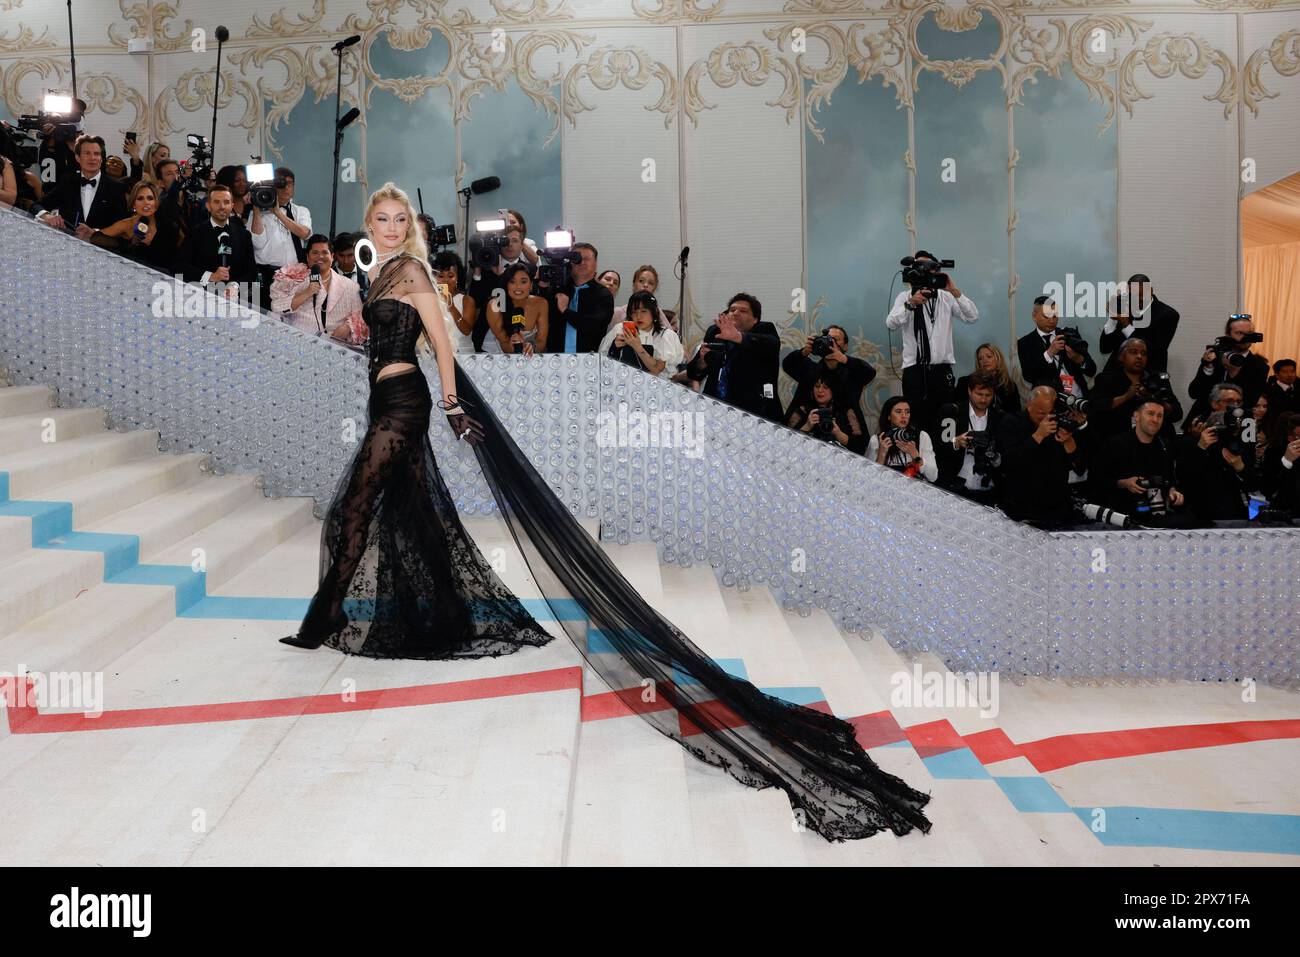 Gigi Hadid wearing dress by Off-White attends 2019 CFDA Fashion Awards at  Brooklyn Museum (Photo by Lev Radin / Pacific Press Stock Photo - Alamy